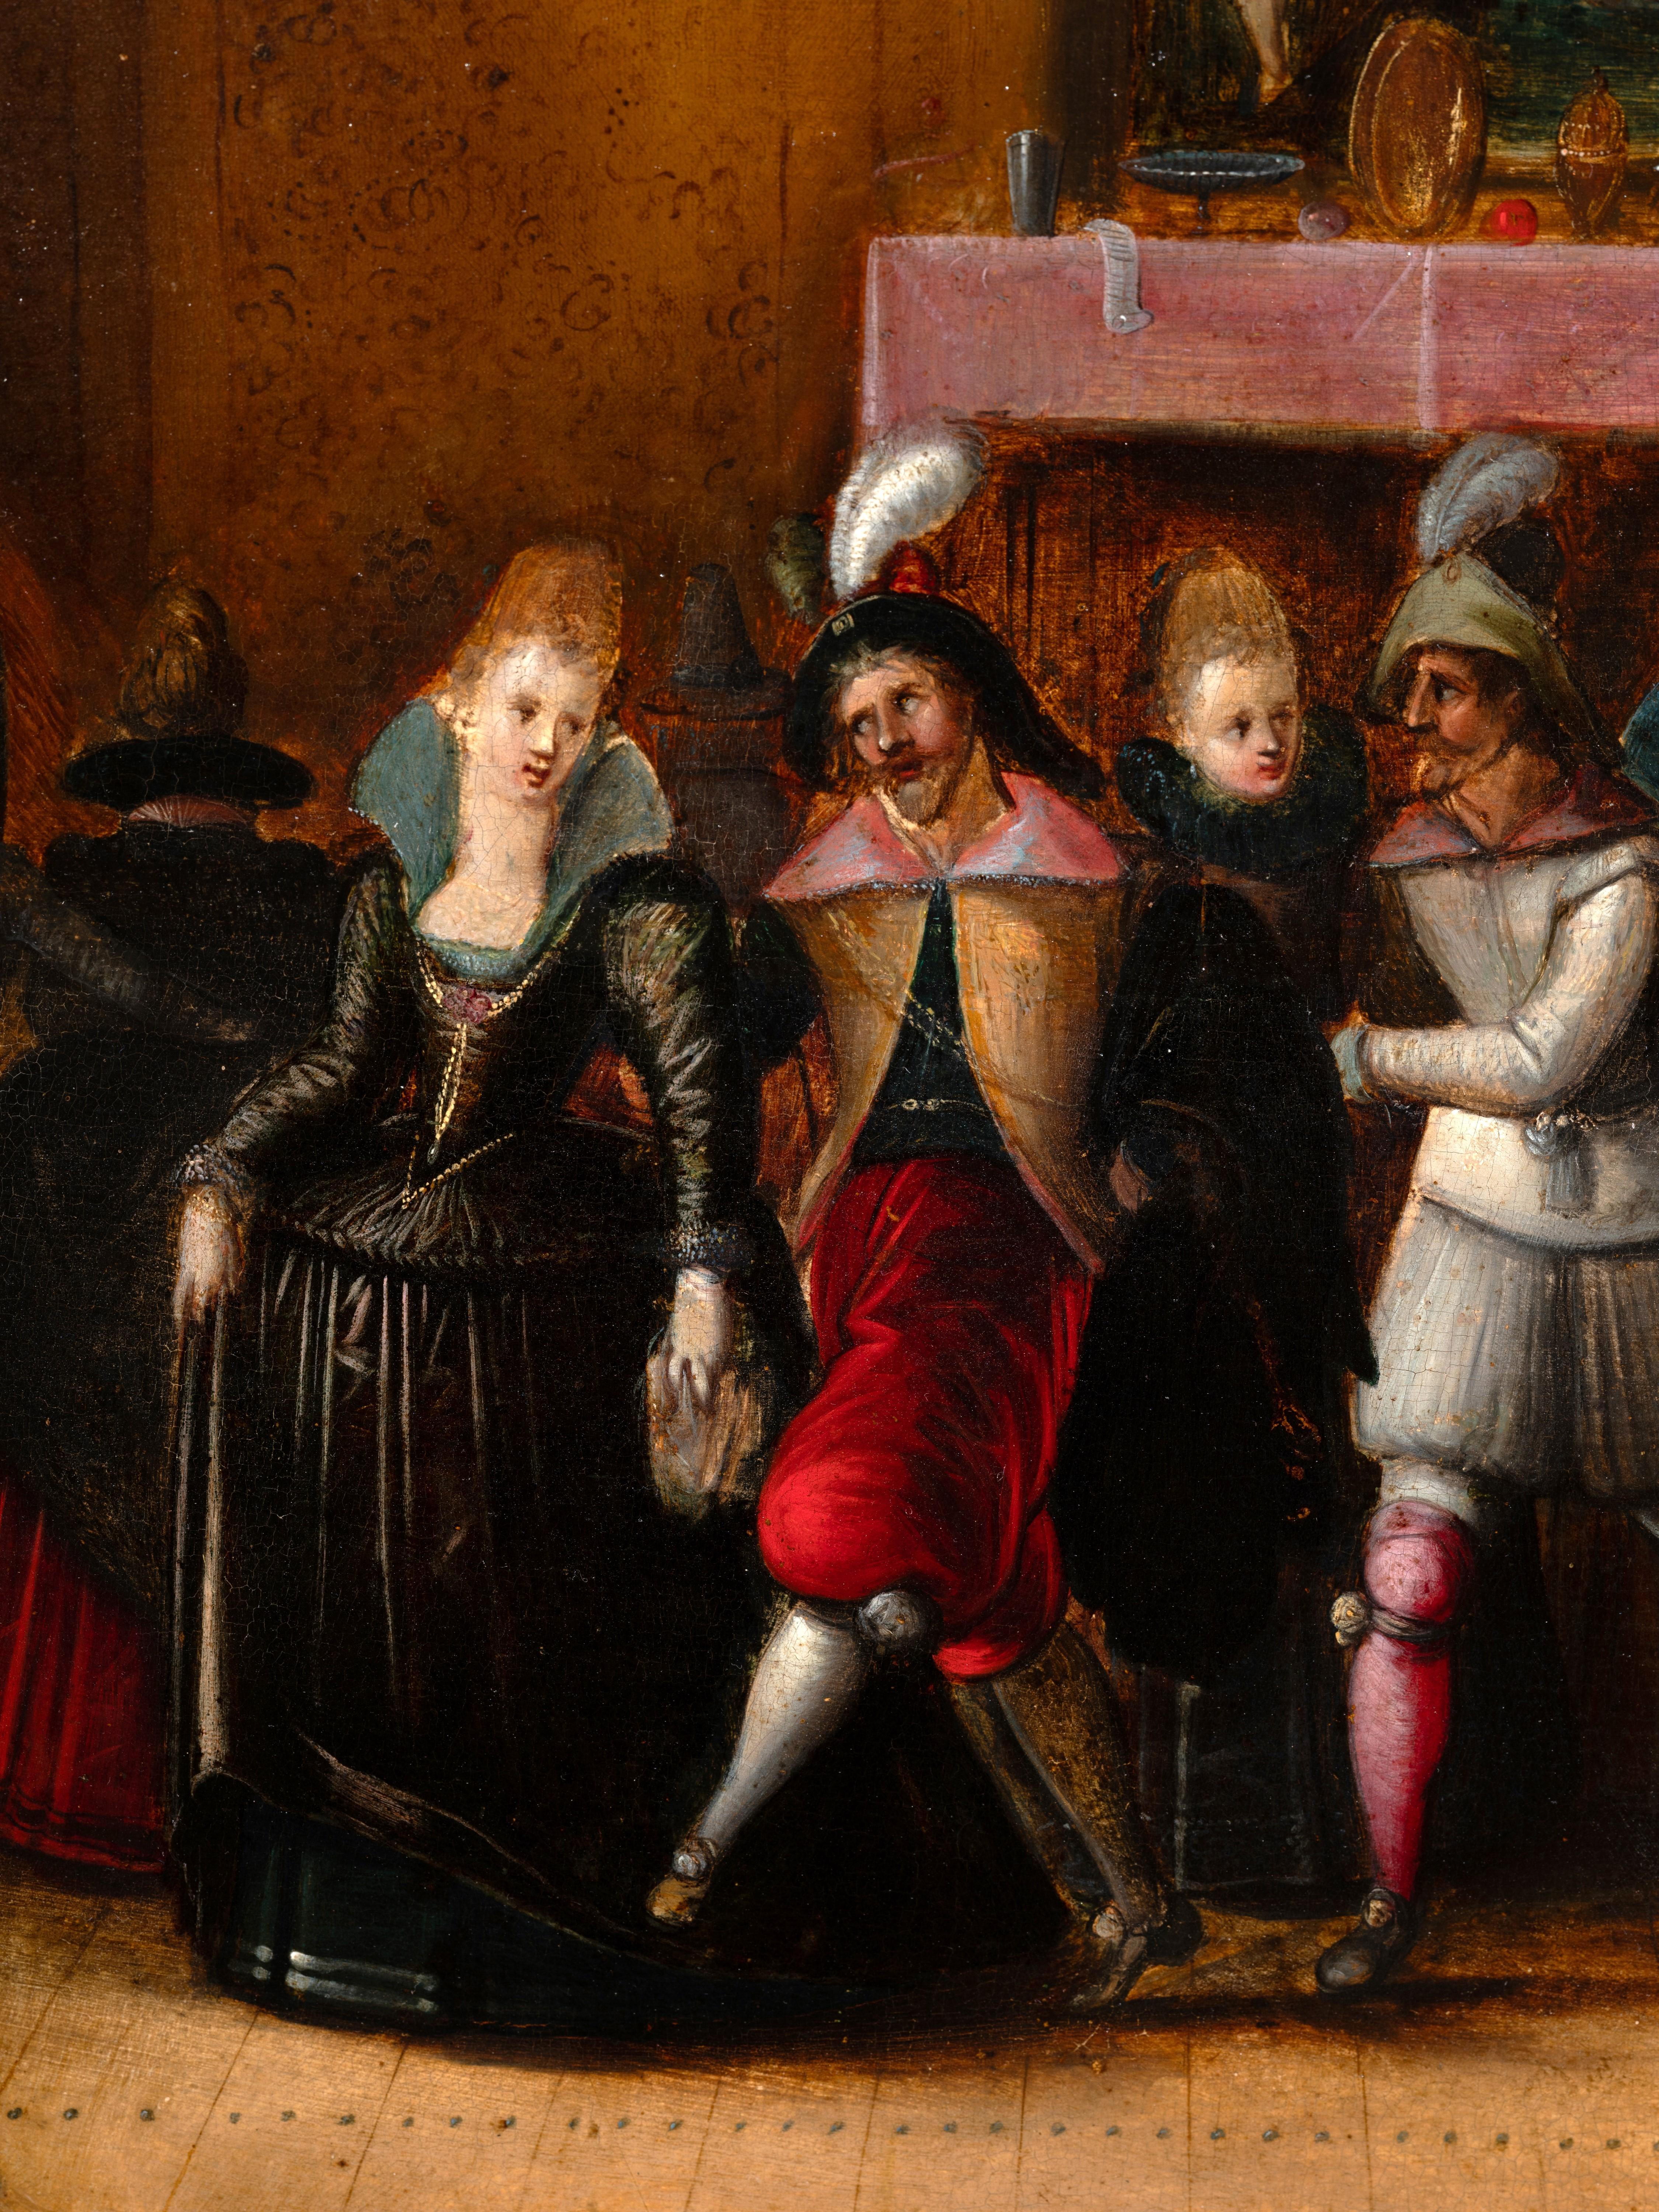 Attributed à H. Francken II, 17th c. Anwerp - The prodigal son among courtesans - Old Masters Painting by HIERONYMUS FRANCKEN II